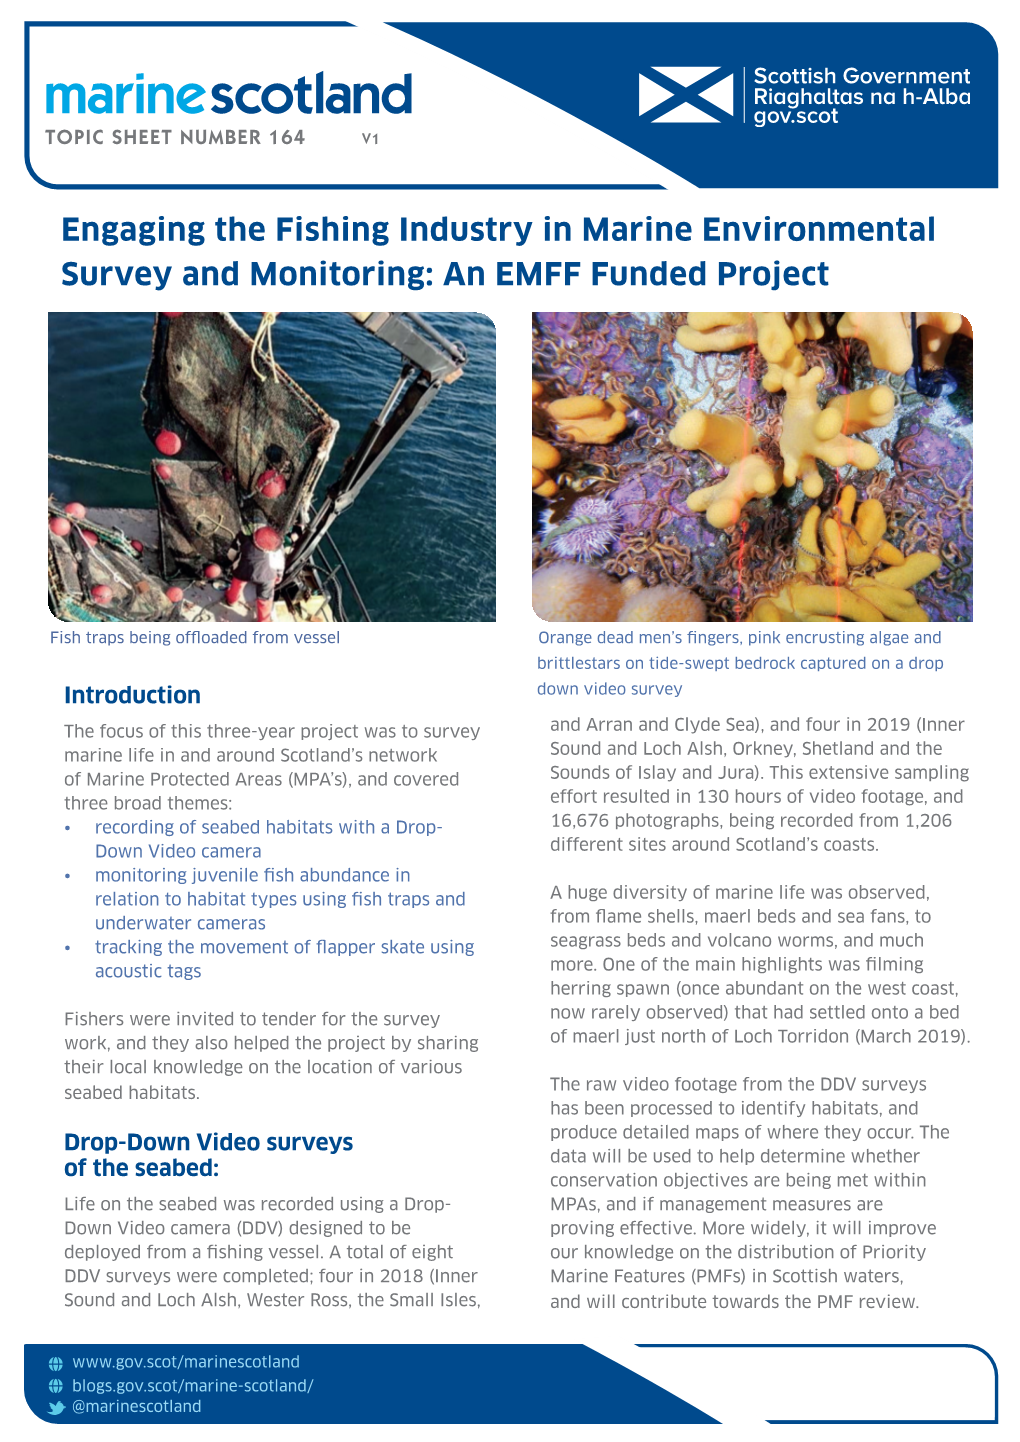 Engaging the Fishing Industry in Marine Environmental Survey and Monitoring: an EMFF Funded Project